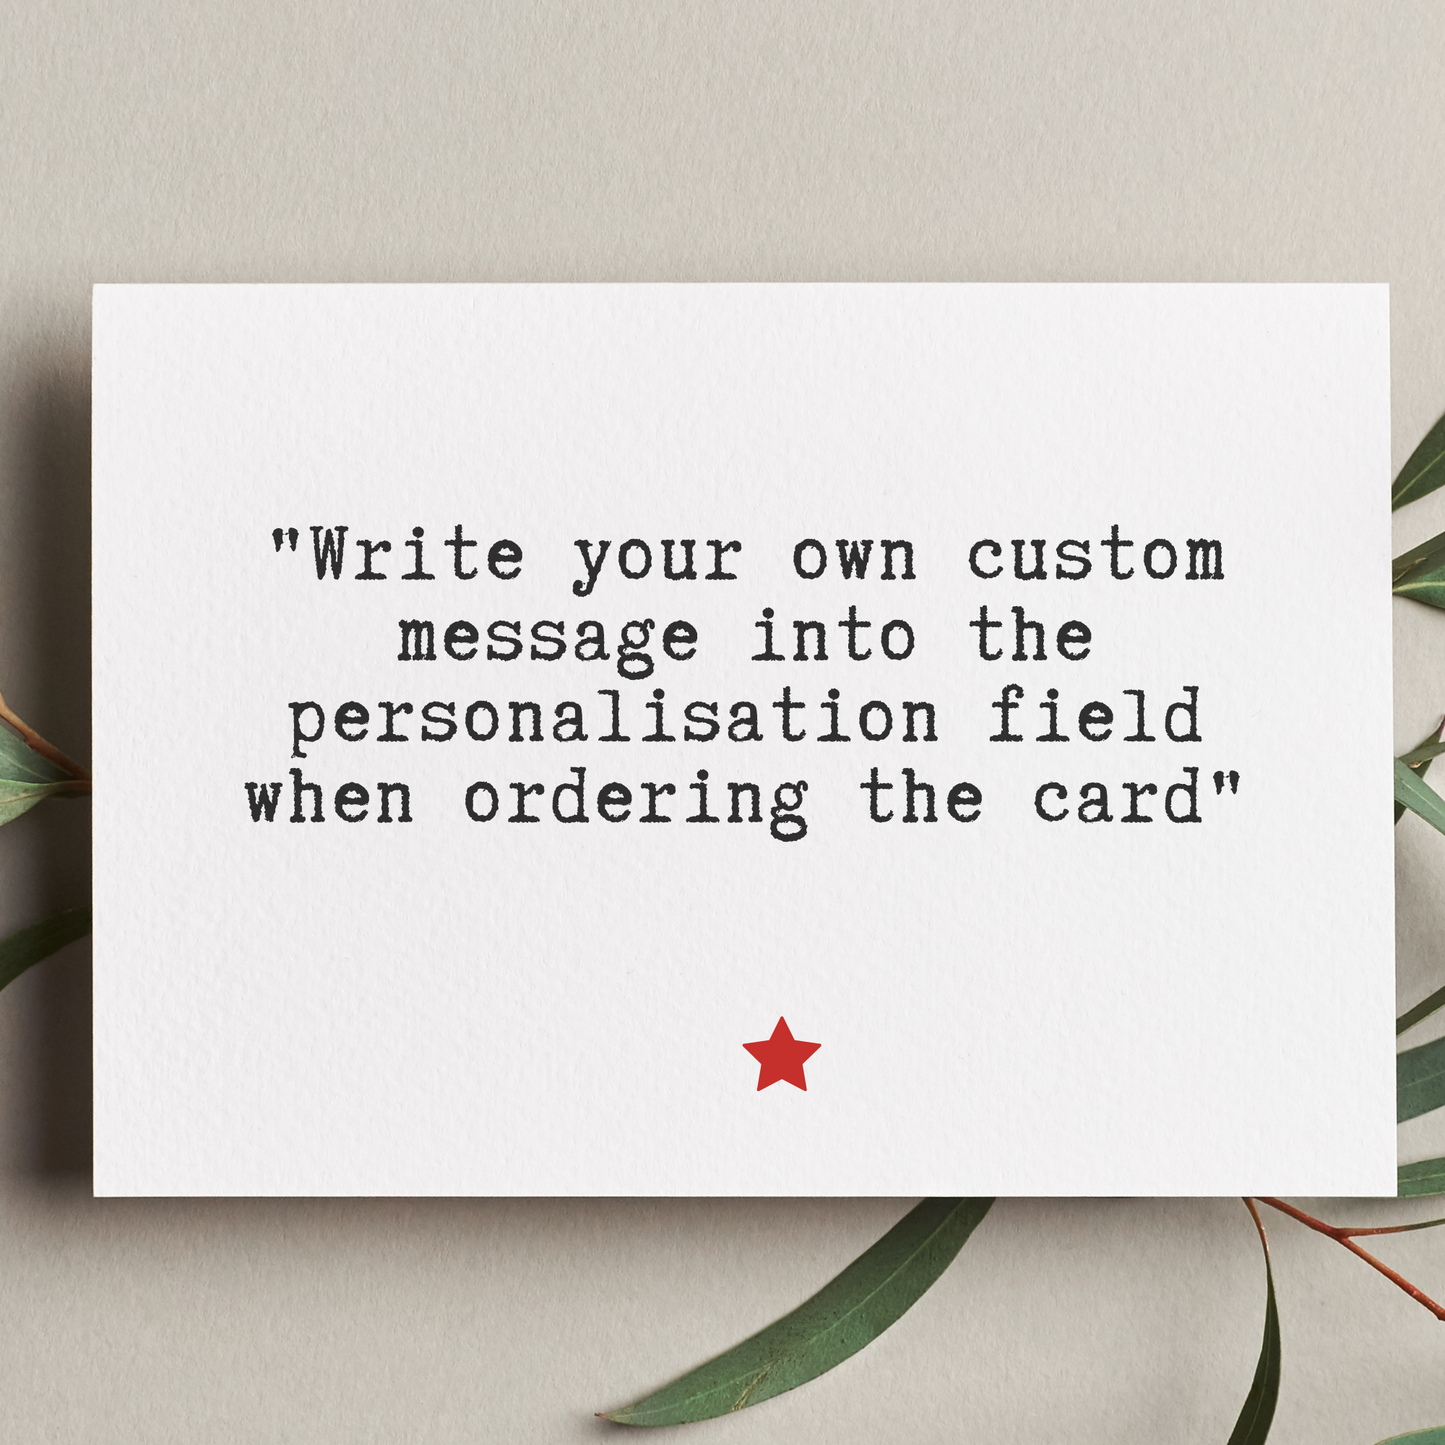 Create Your Own Personalised Cards: Simple and Cool Font